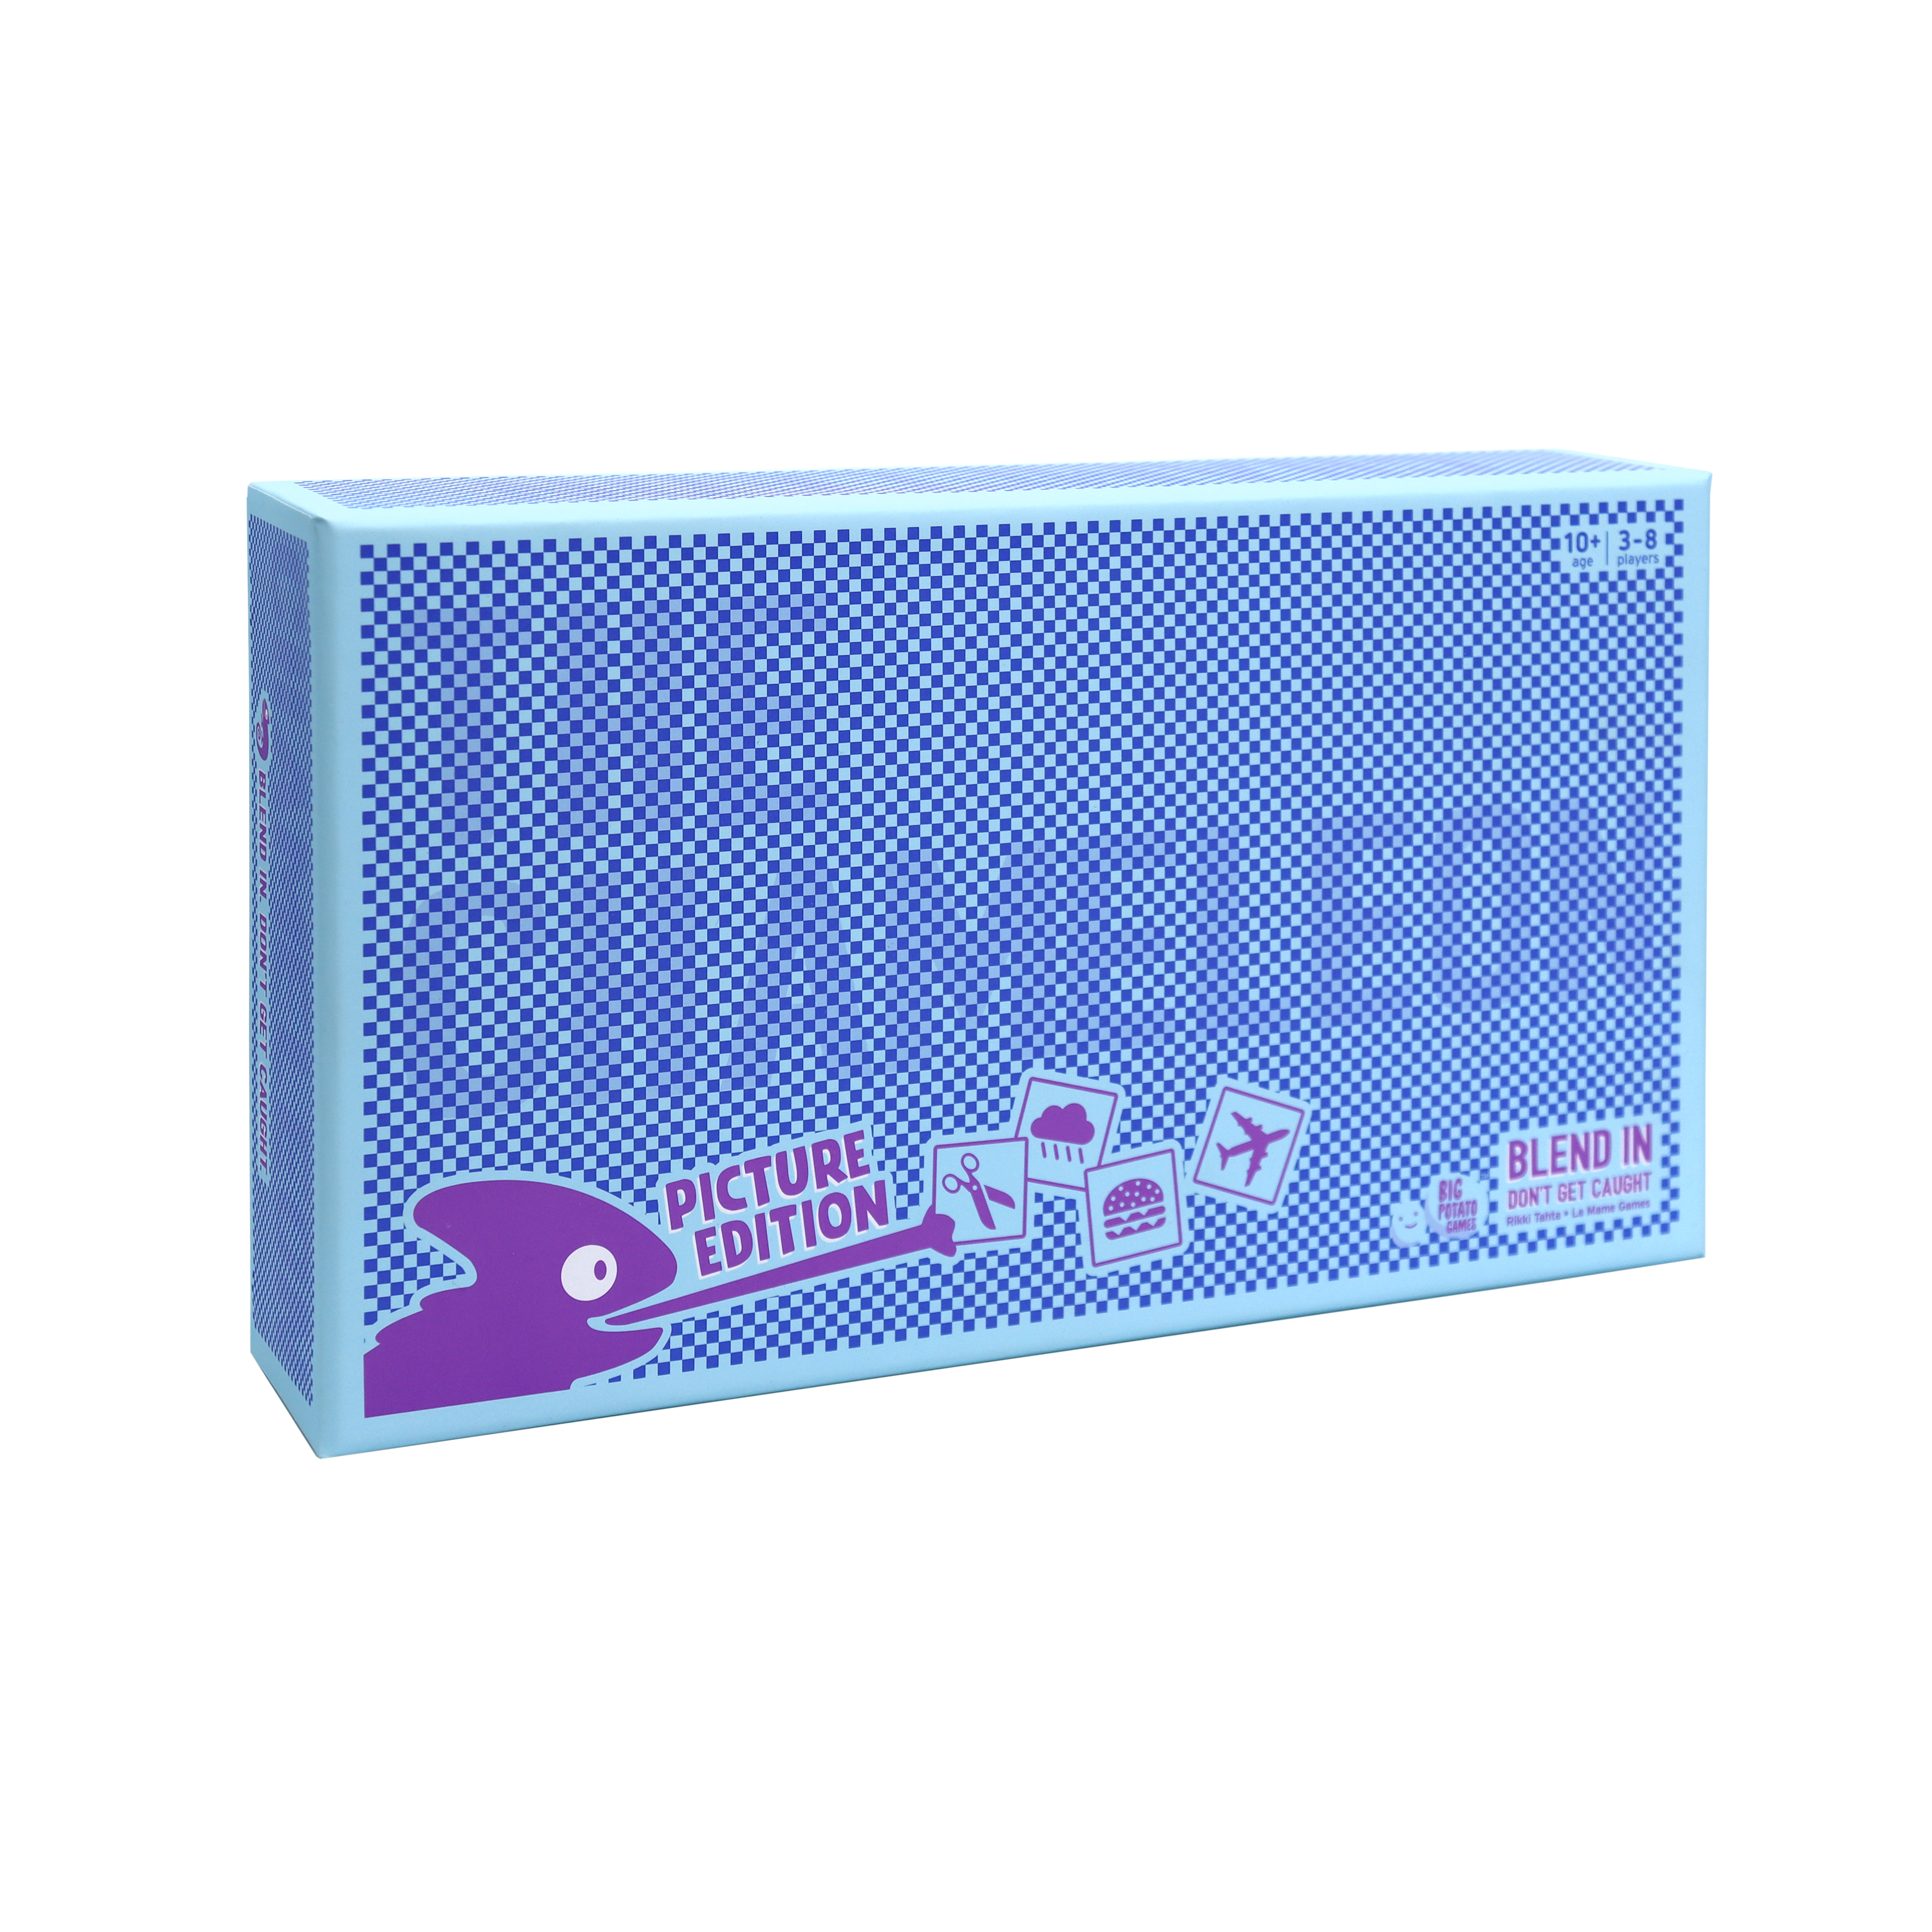 The Chameleon Picture game box